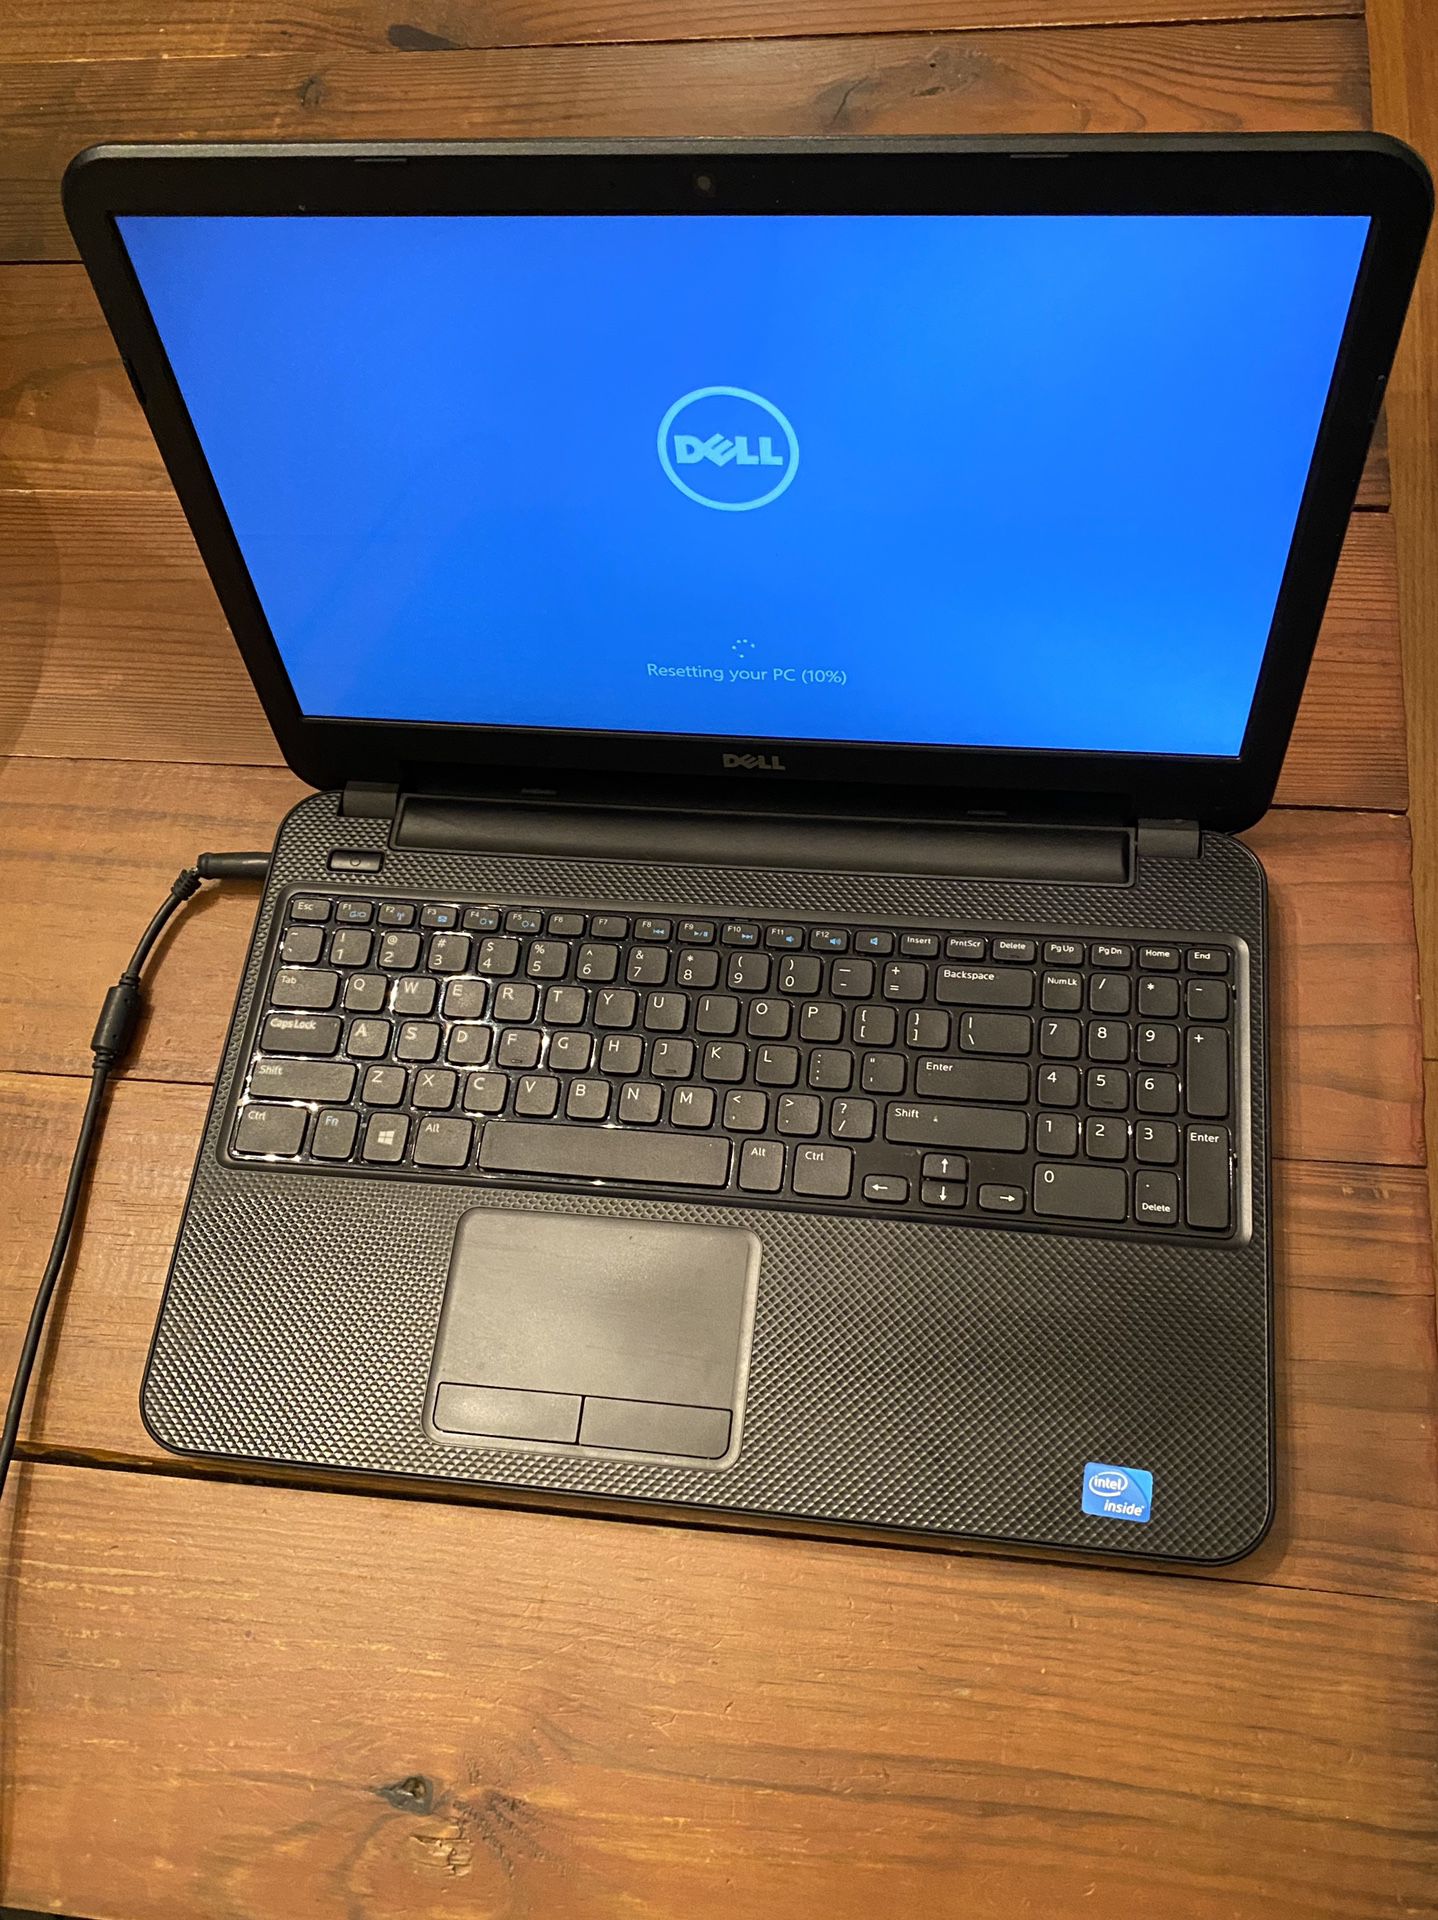 Dell laptop with windows 8